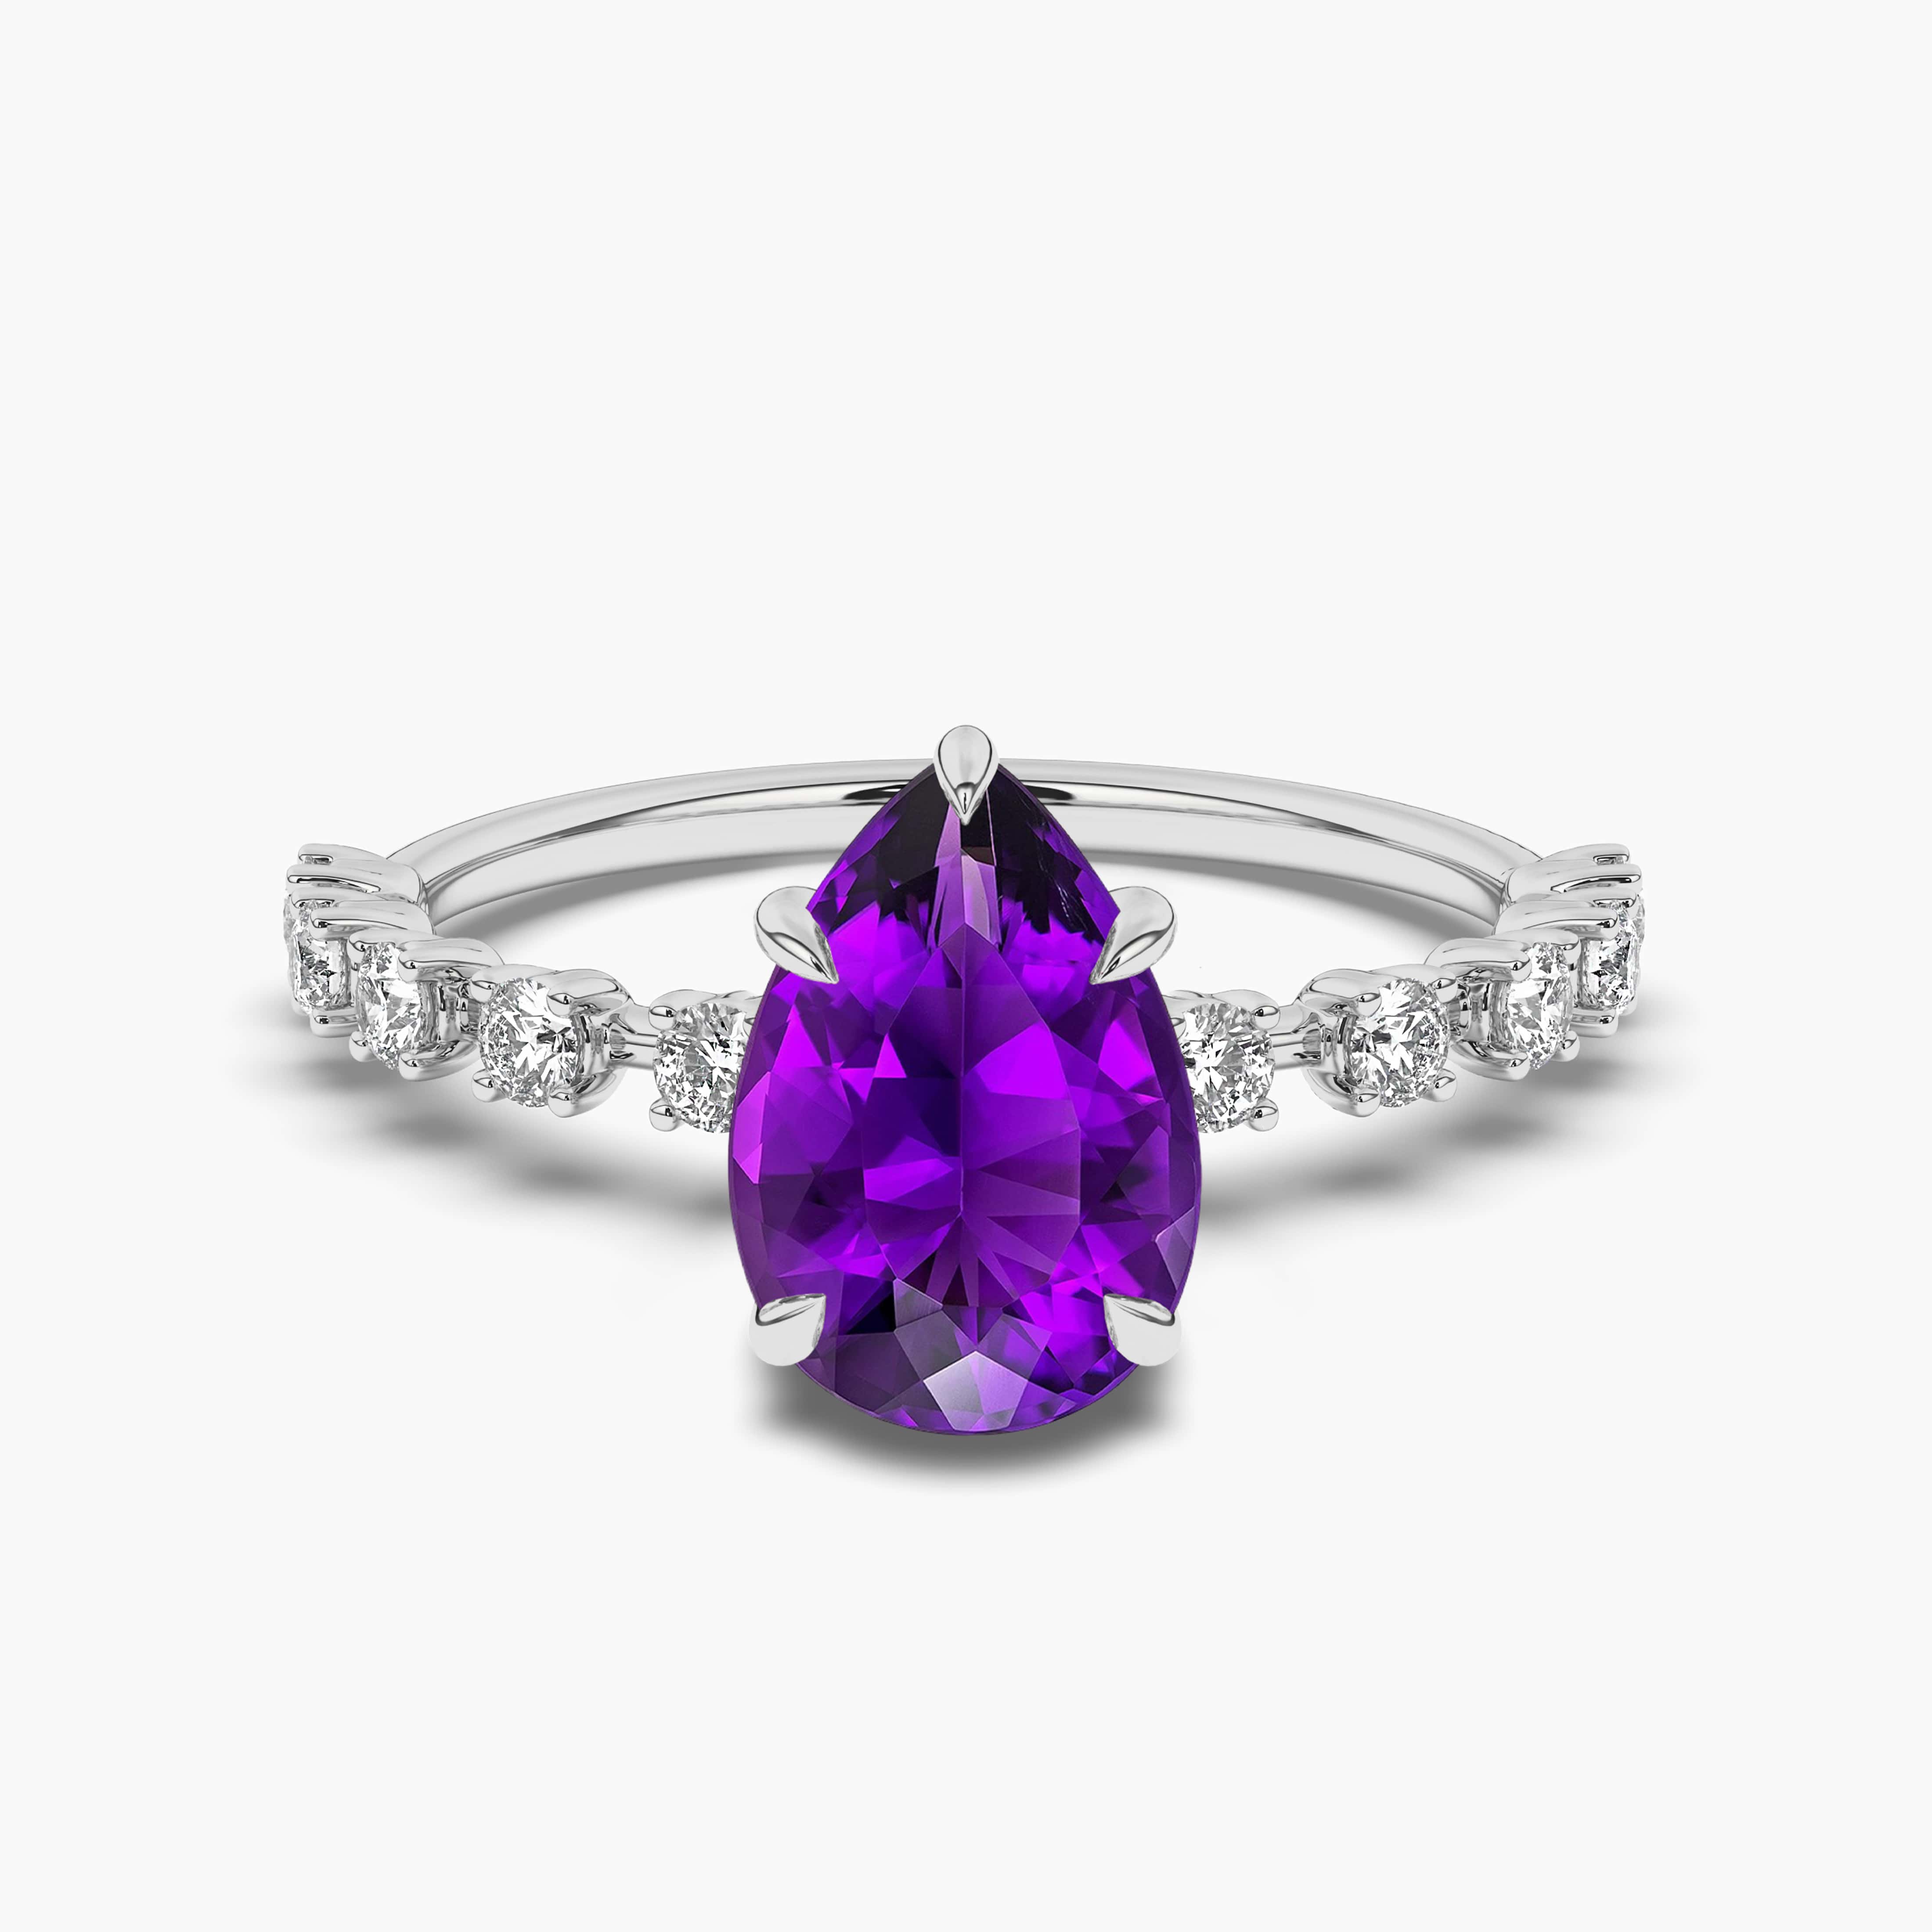 WHITE GOLD PEAR SHAPED AMETHYST ENGAGEMENT RING